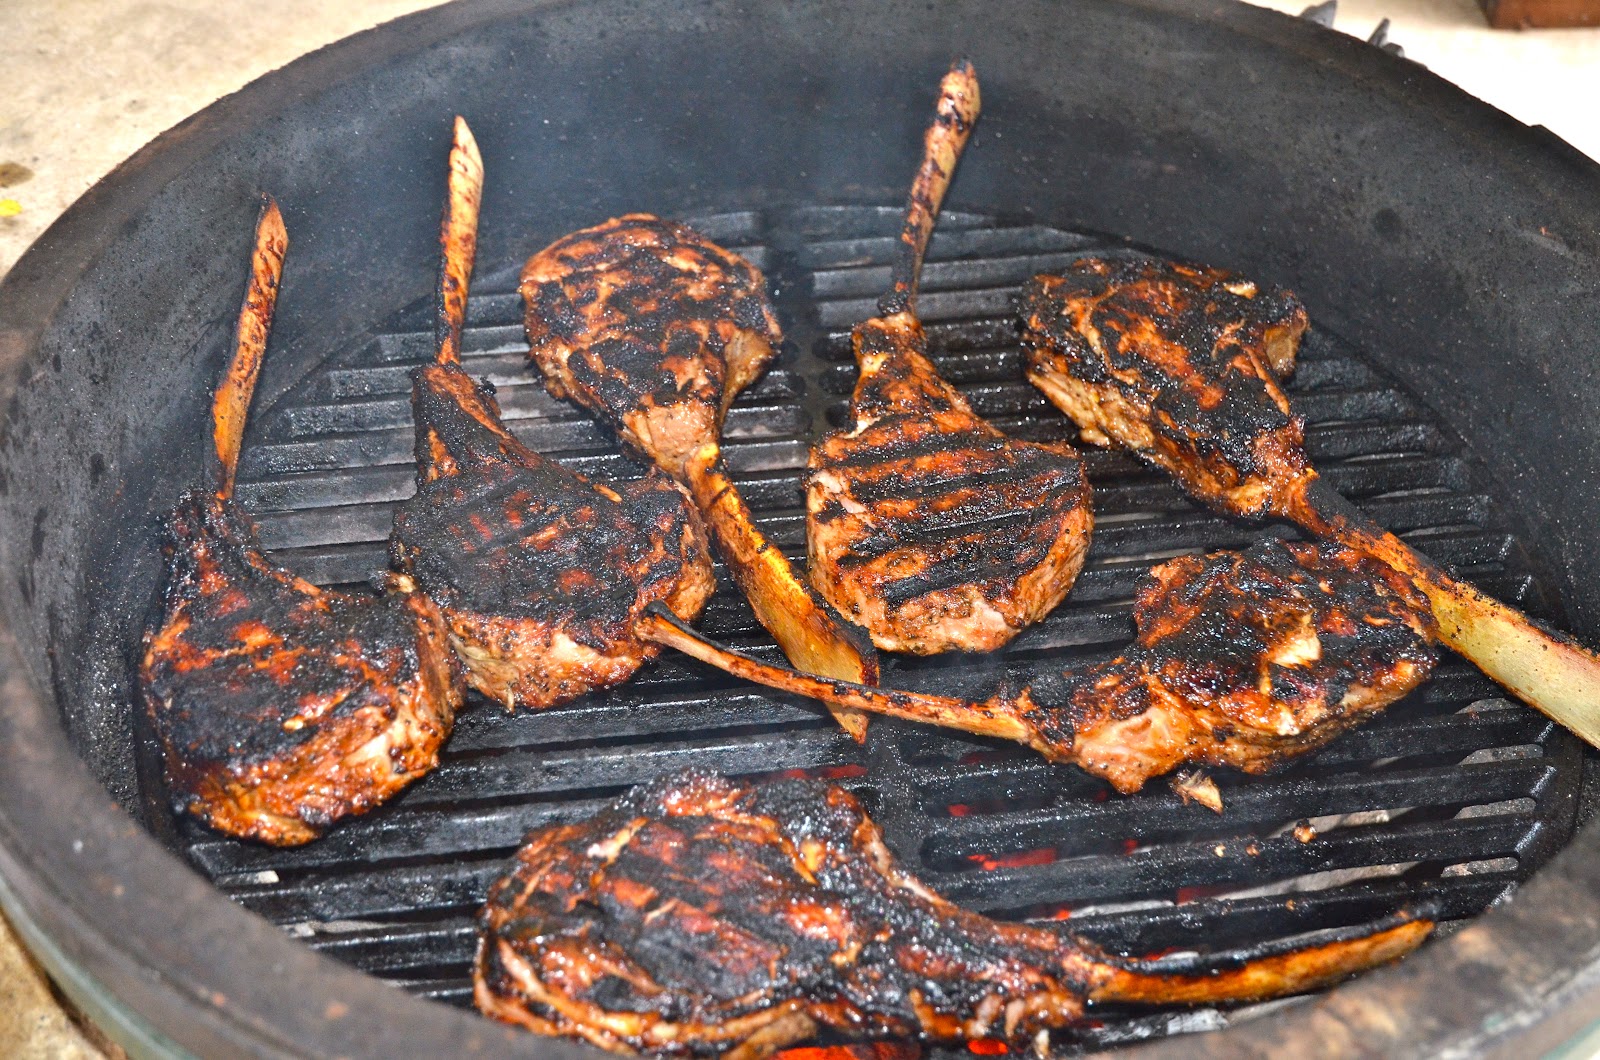 Thrills from On and Off the Grill: Bone-In Veal Chops